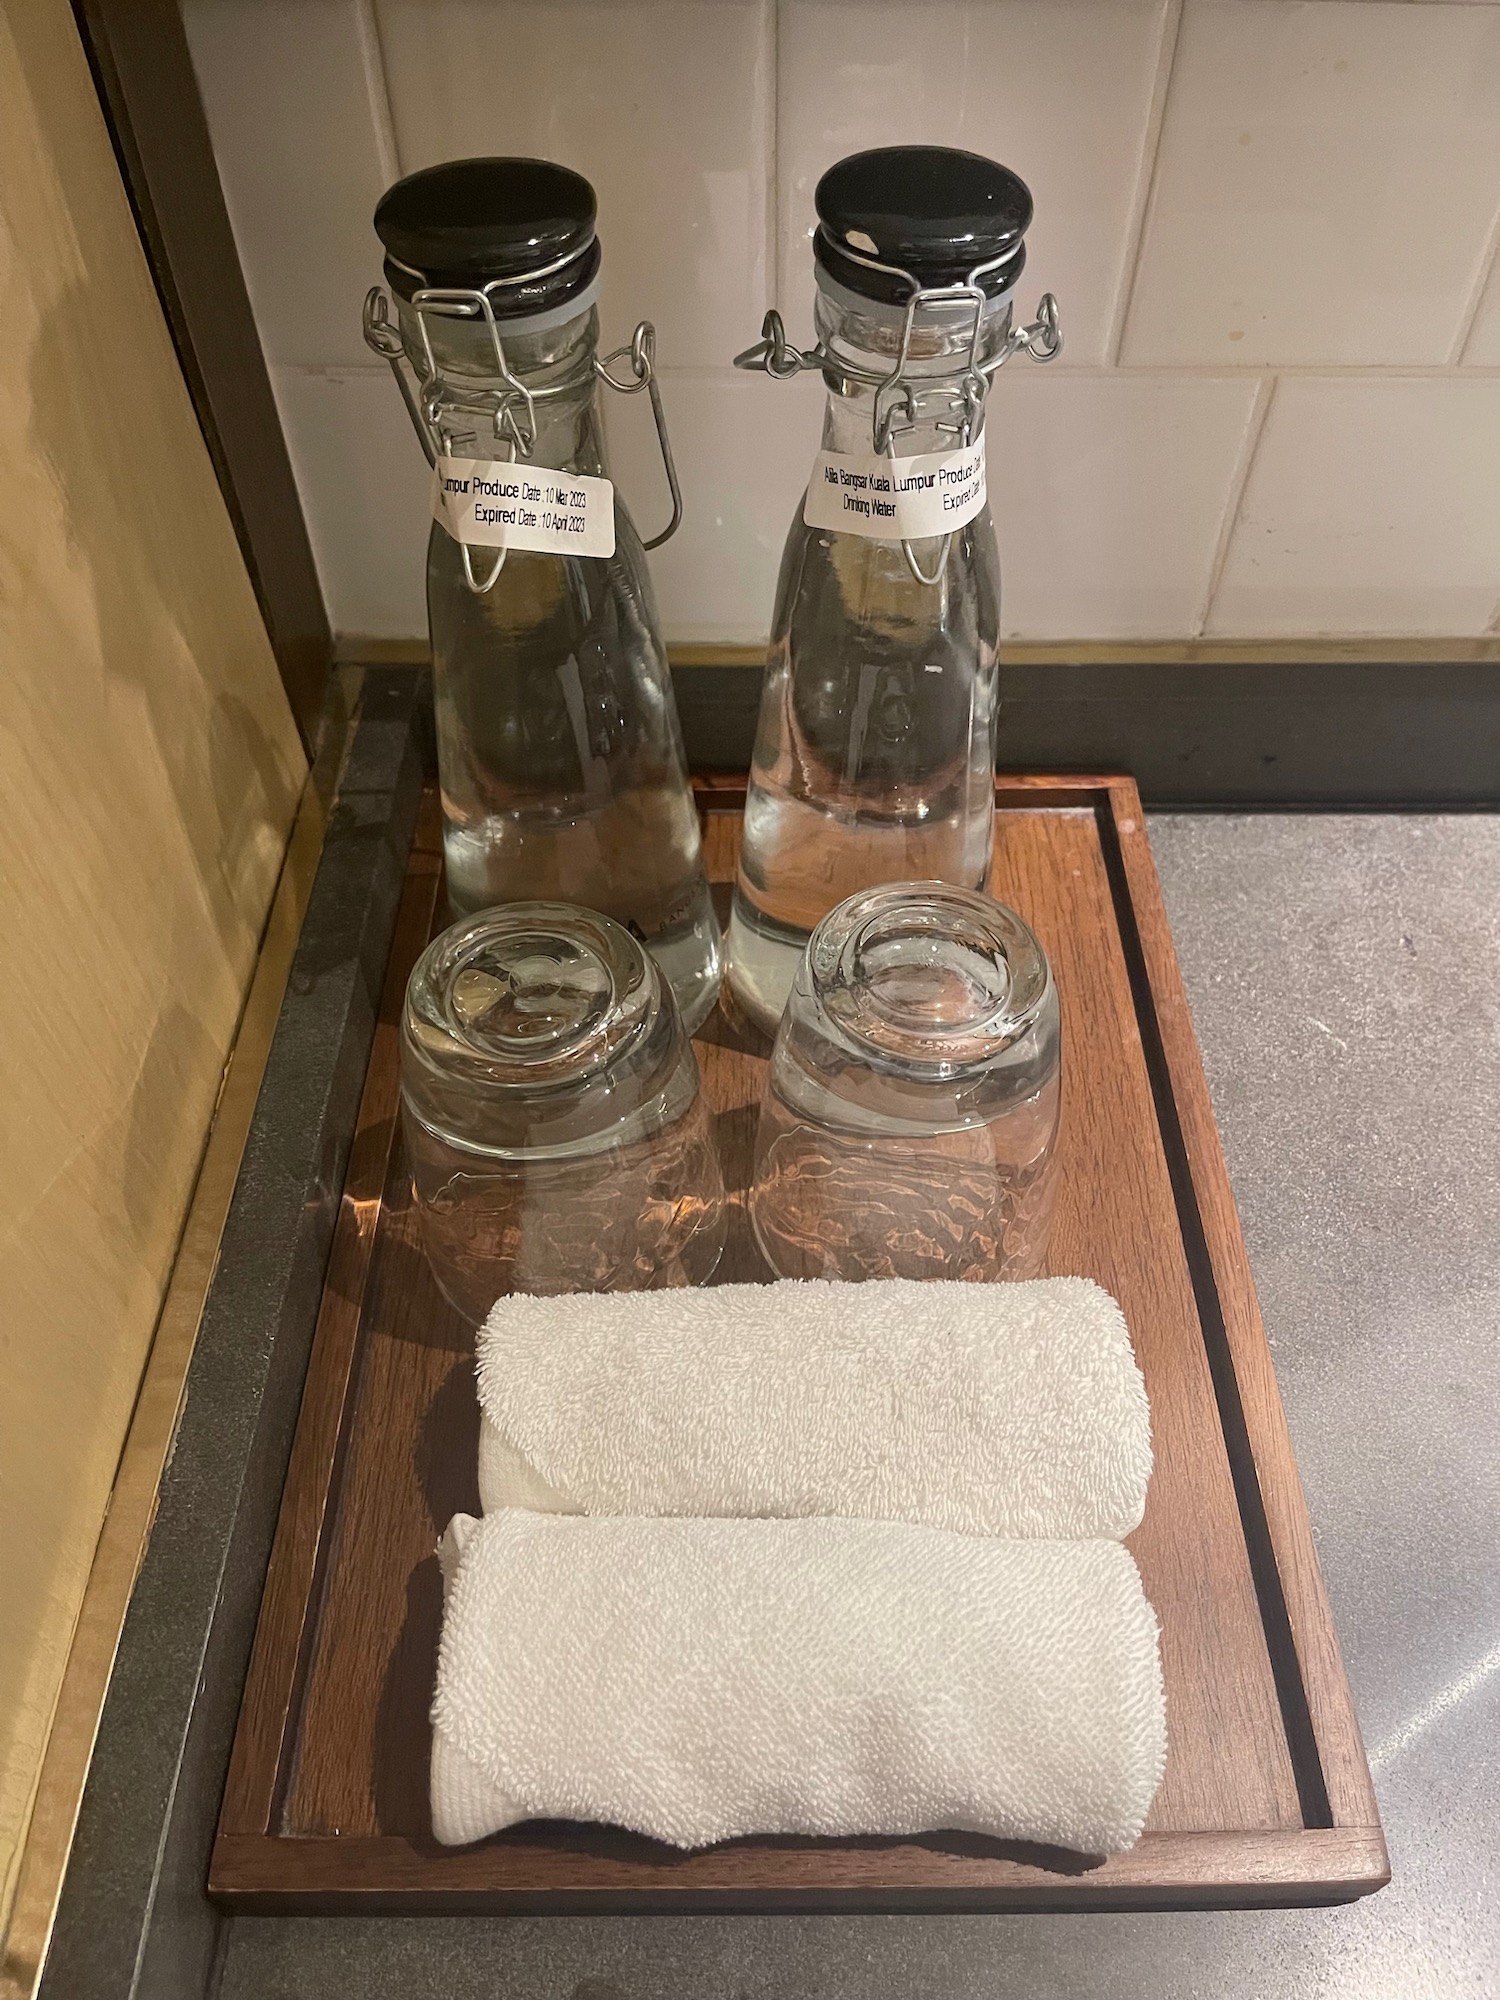 a group of glass bottles and towels on a tray